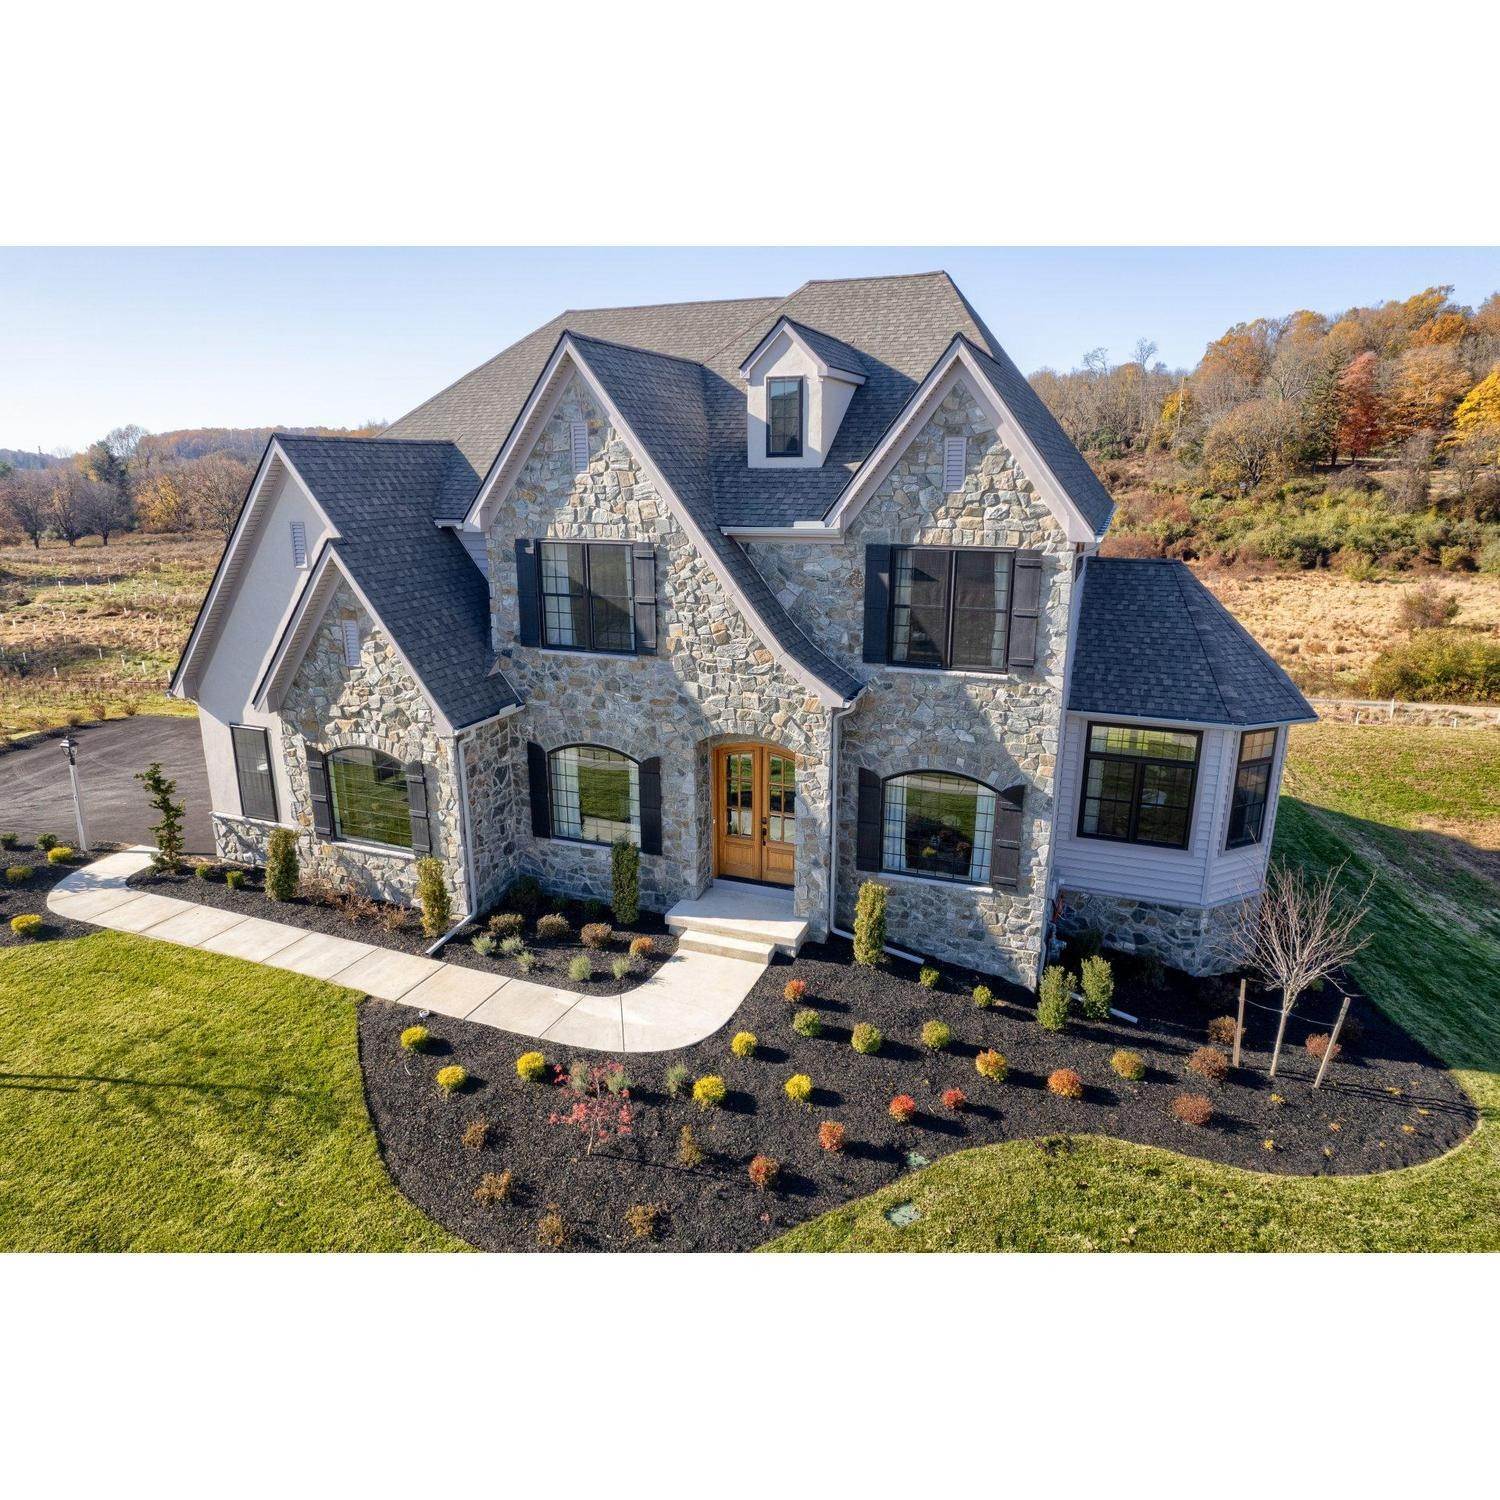 43. Ventry at Edgmont Preserve byggnad vid 101 Parkview Way, Newtown Square, PA 19073